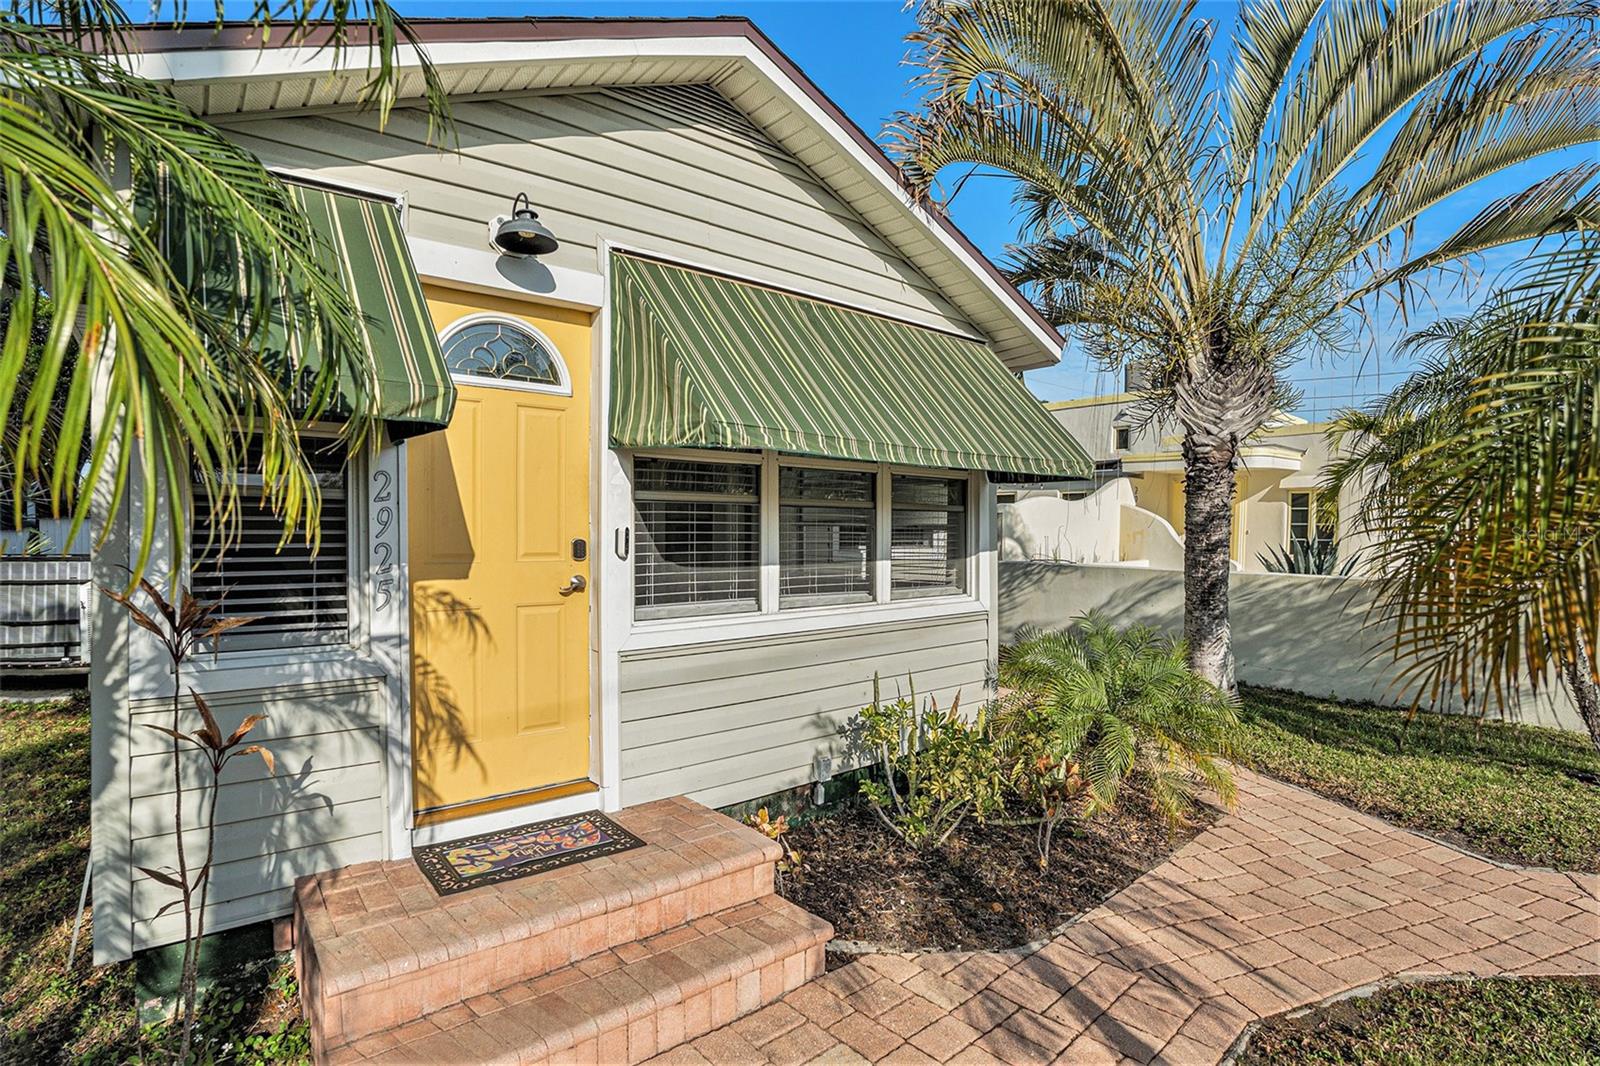 Welcome home to this adorable updated Gulfport Beach cottage cutie!!!